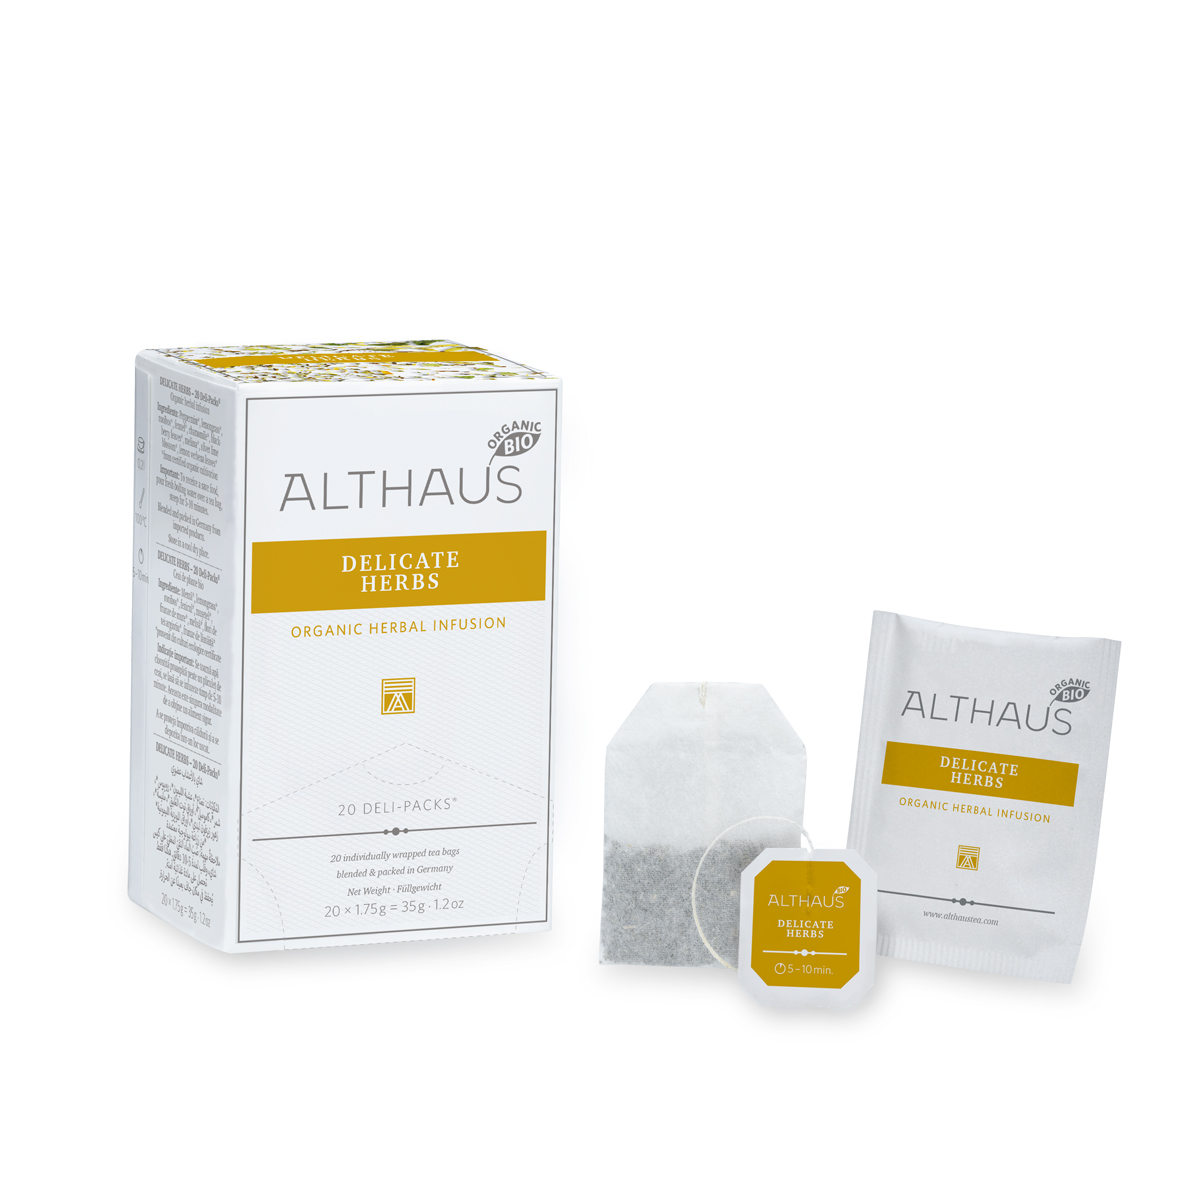 Althaus Tee Delicate Herbs Deli Pack